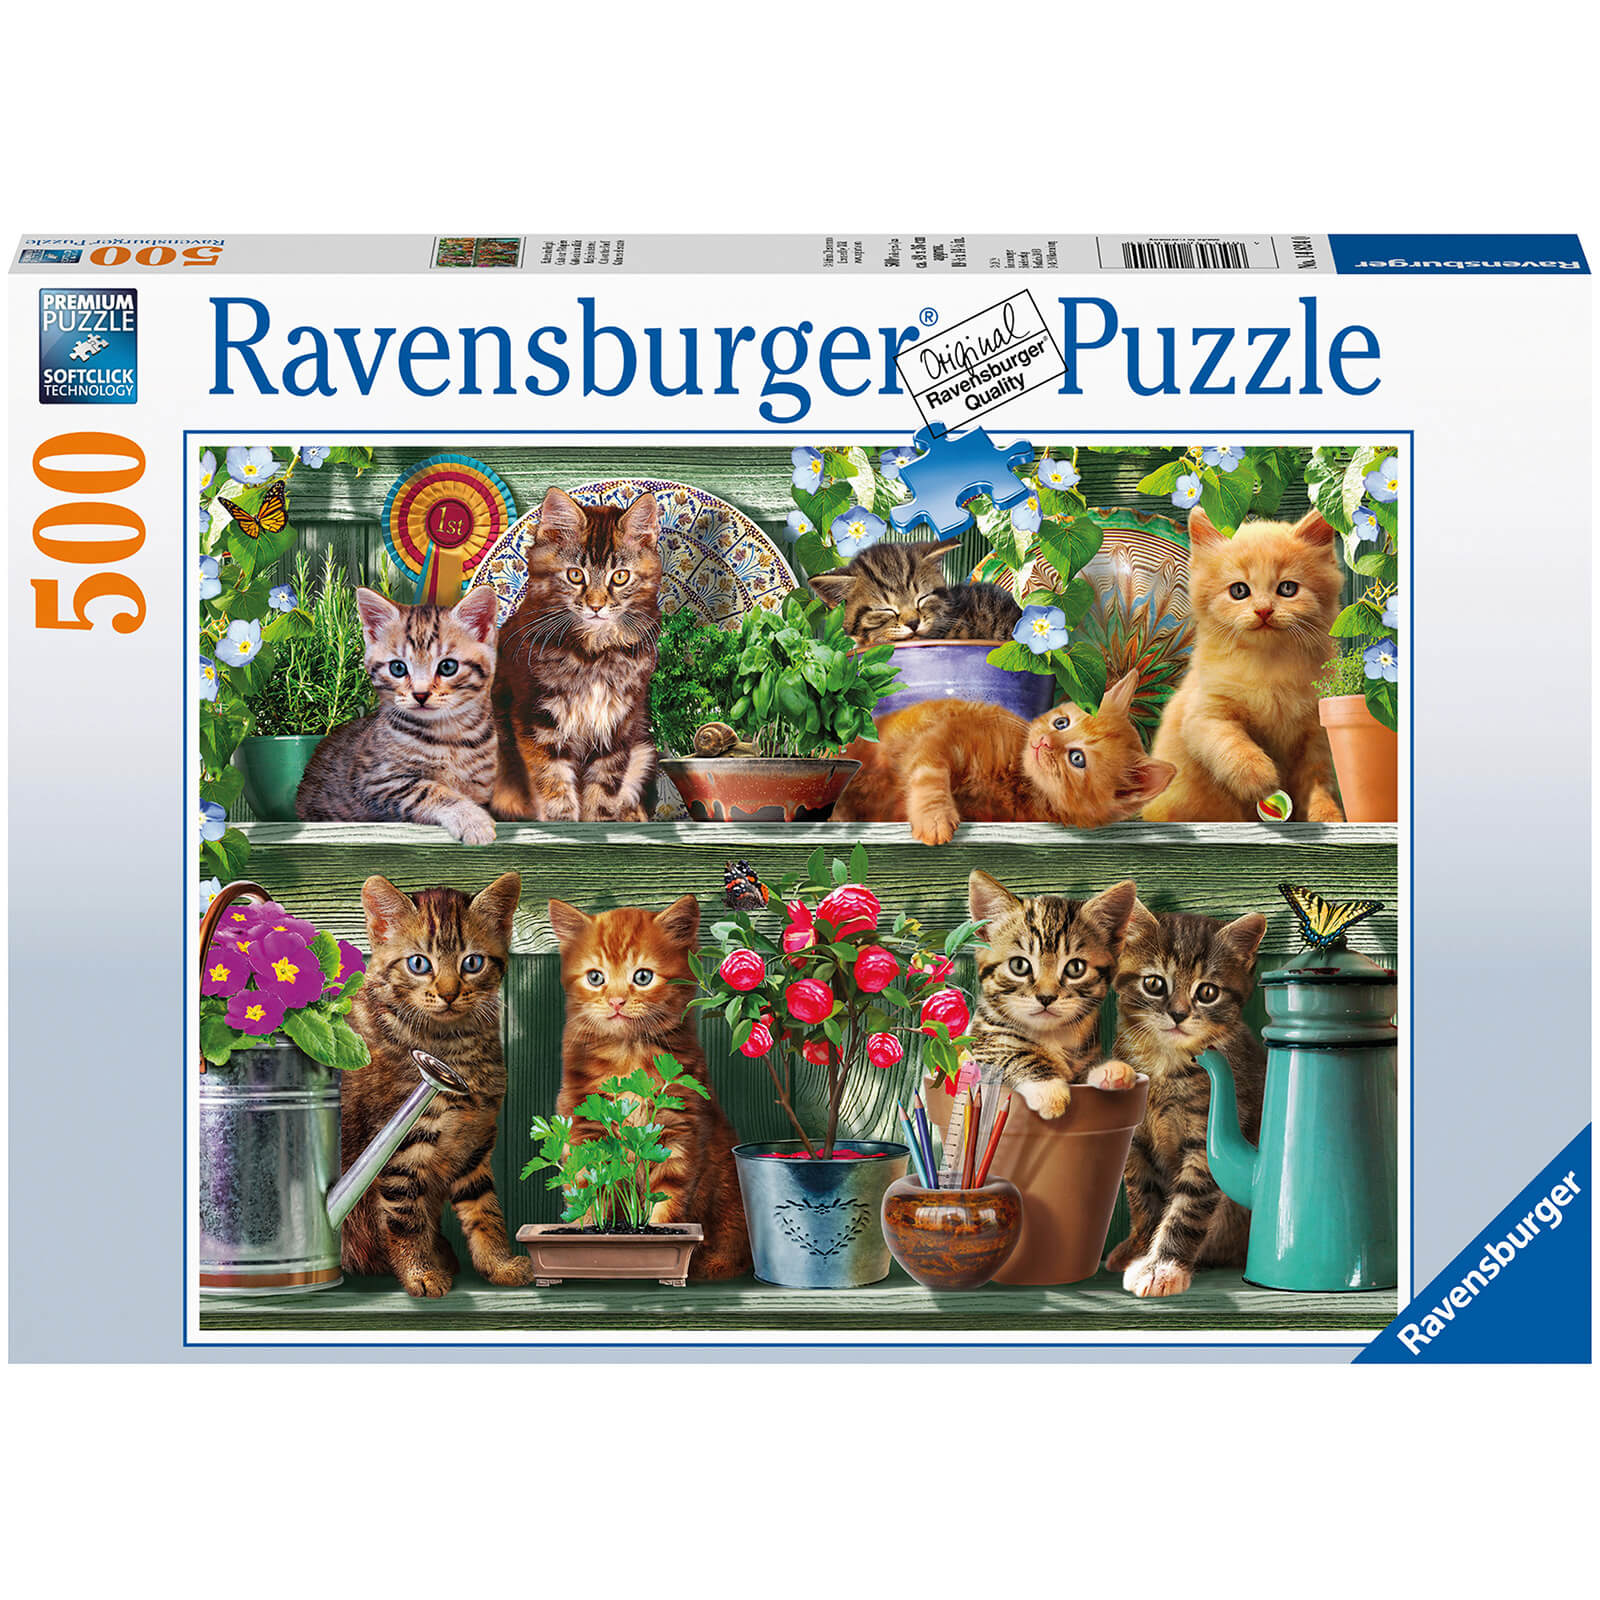 Ravensburger Cats on the Shelf 500 piece Jigsaw Puzzle